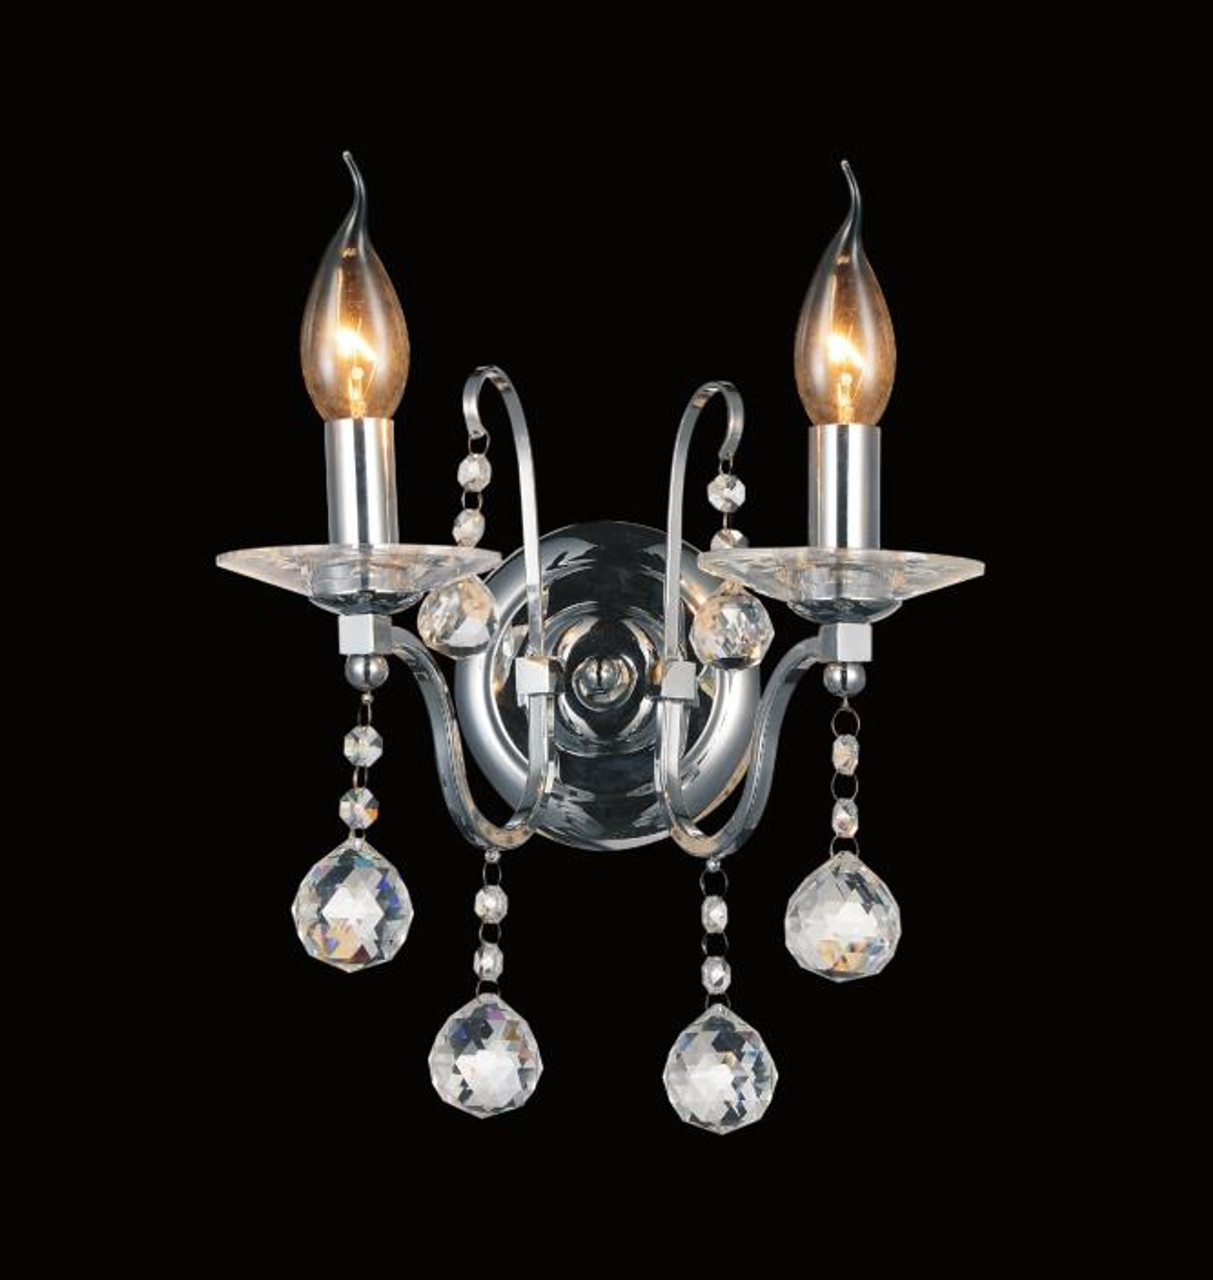 CWI LIGHTING 5507W12C-2 2 Light Wall Sconce with Chrome finish